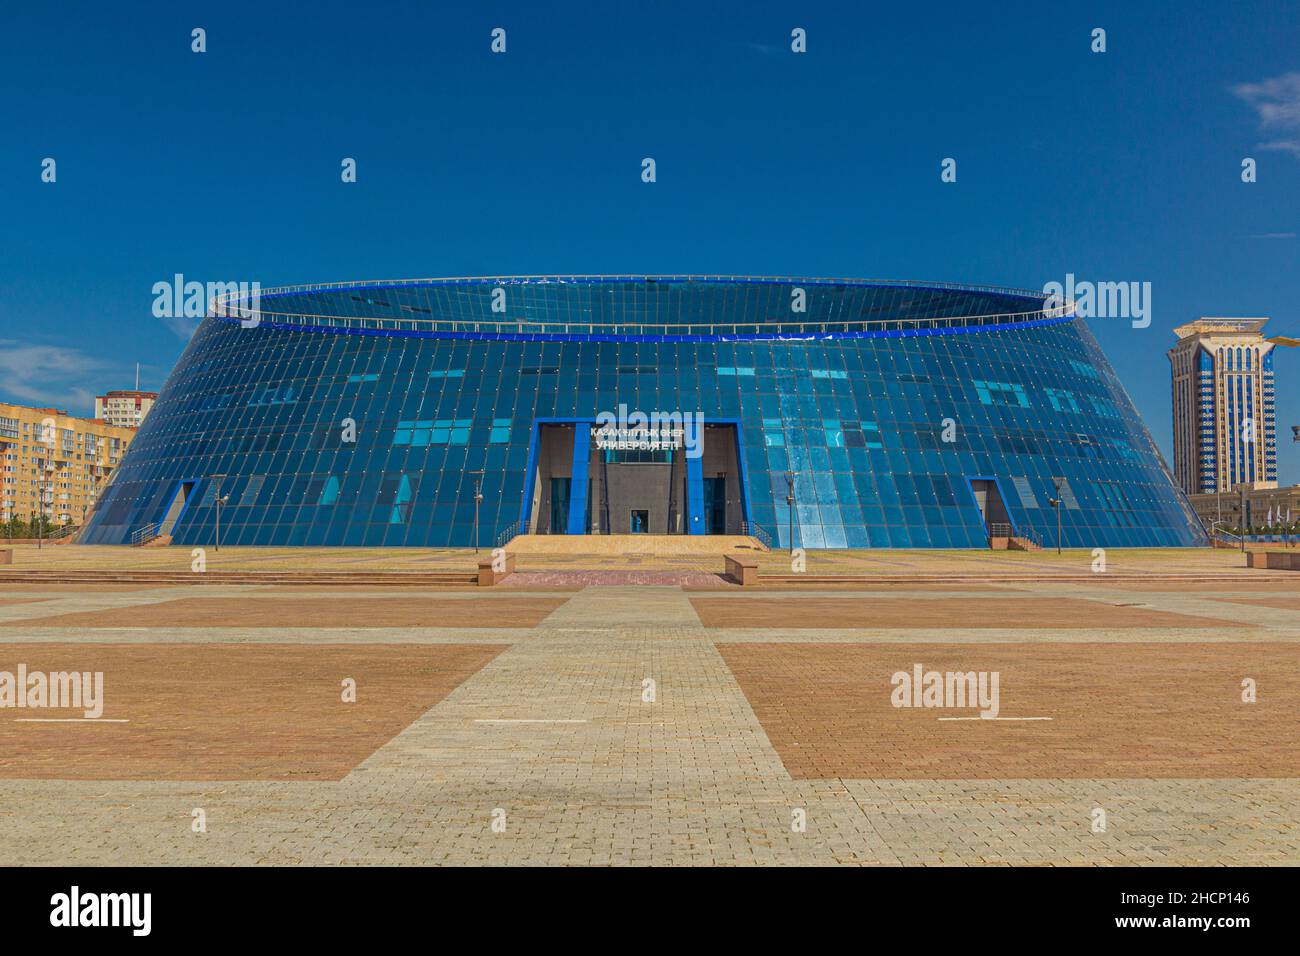 ASTANA, KAZAKHSTAN - JULY 9, 2018: Shabyt Palace of Creativity on the Independence Square in Astana now Nur-Sultan , capital of Kazakhstan. Stock Photo